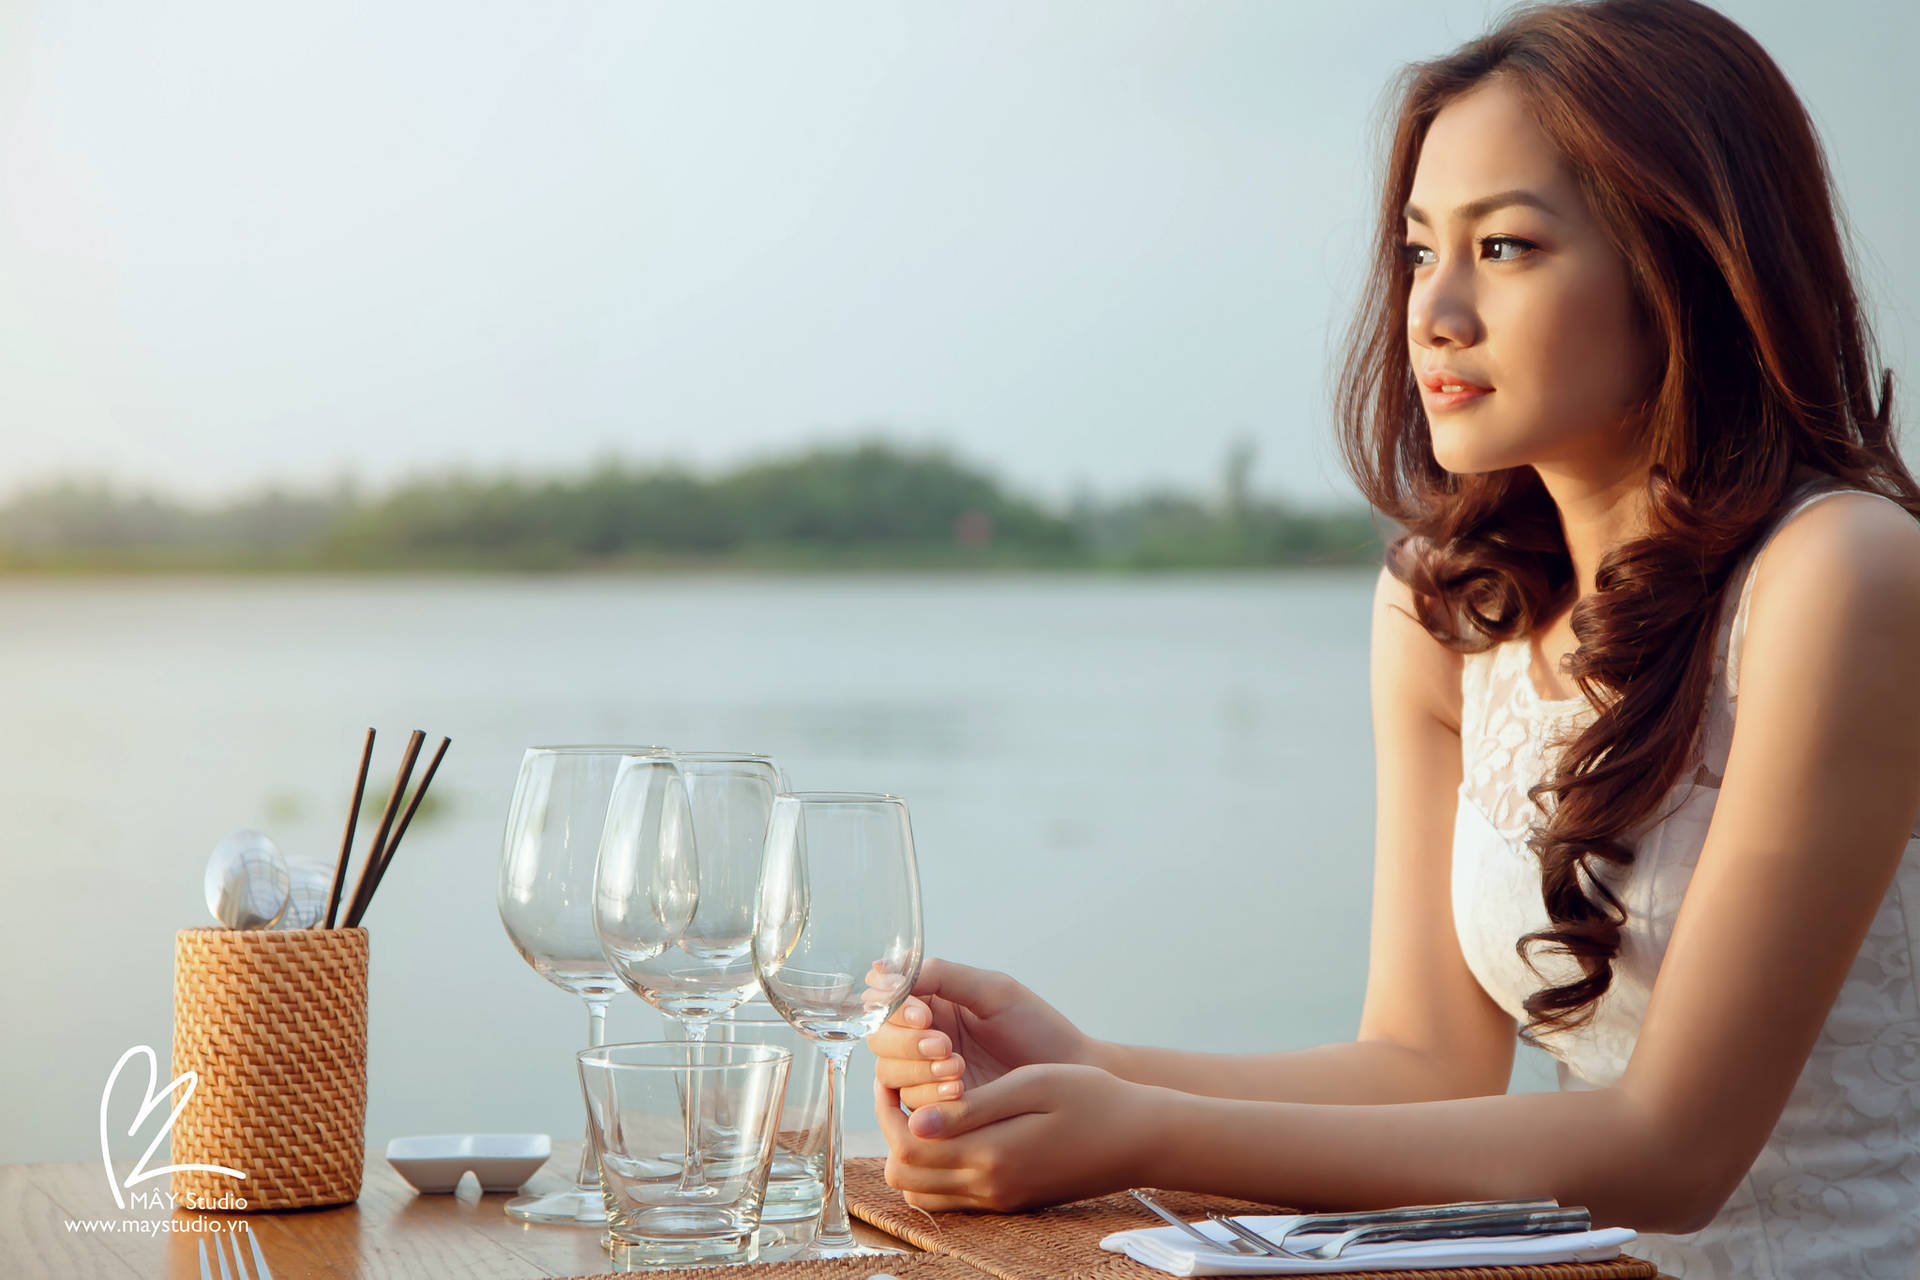 Woman Beautiful Lunch Picture